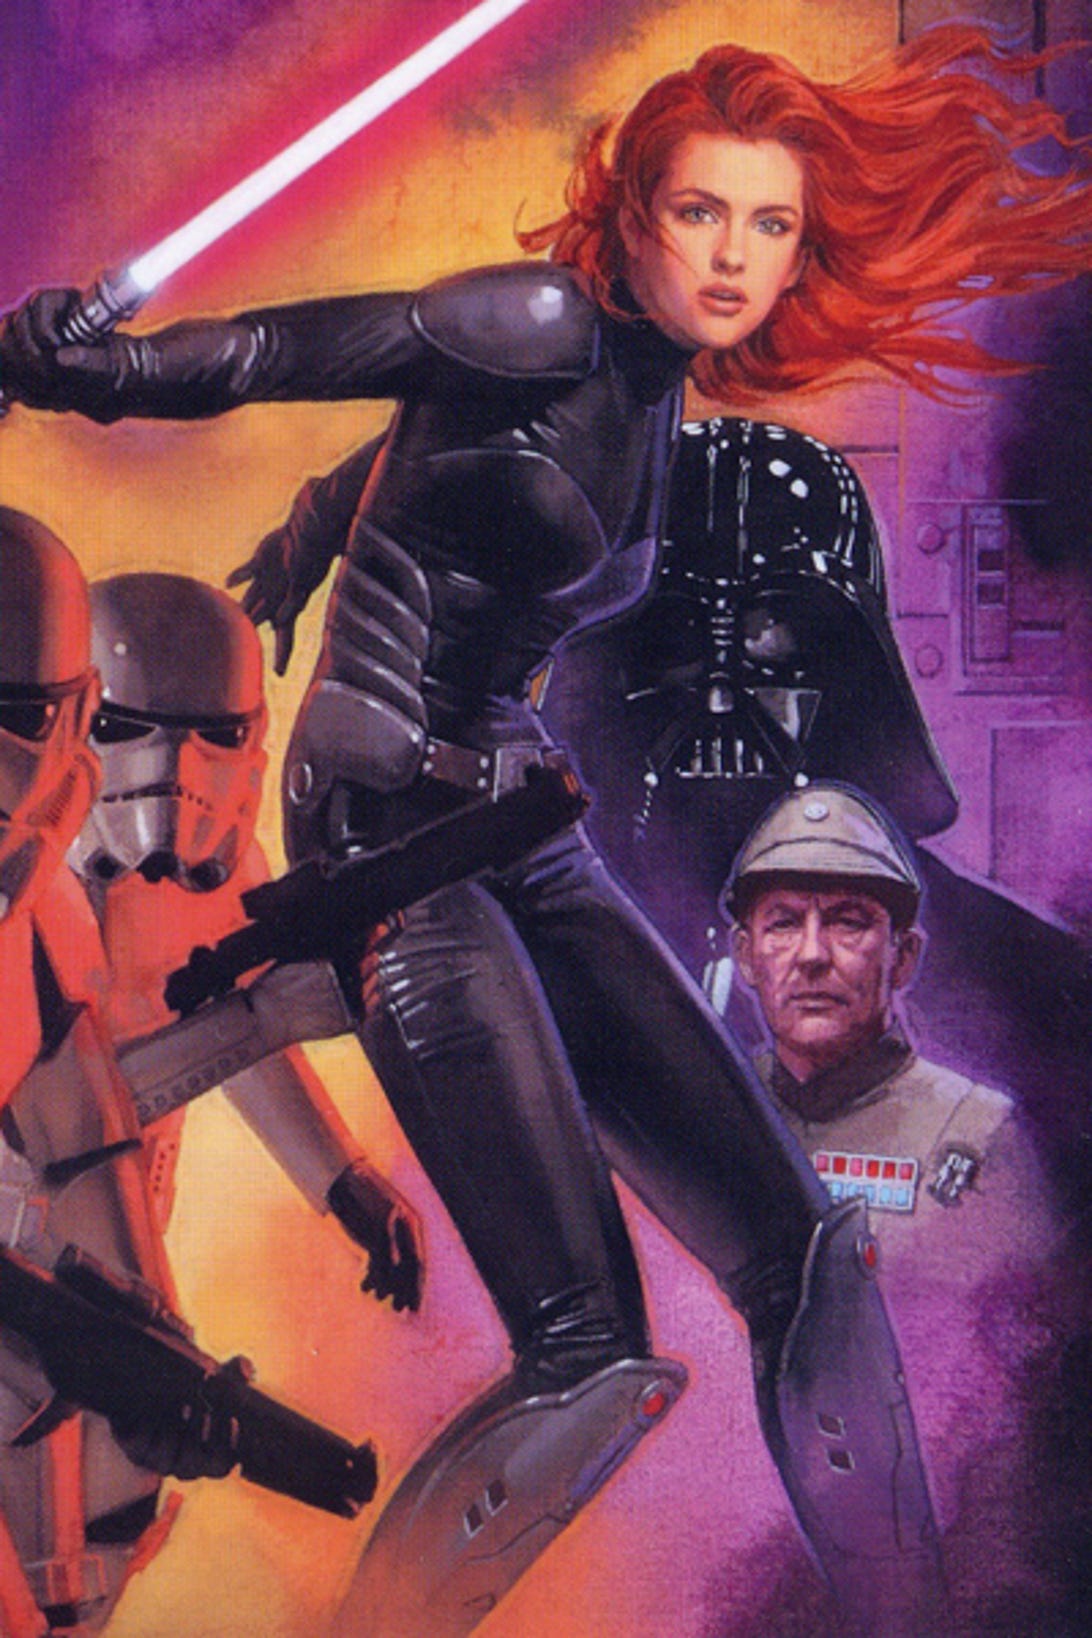 Red-headed fan-favorite Mara Jade was once an assassin of the Empire's dark overlord comics and books. But what would she be in a "Star Wars" movie?